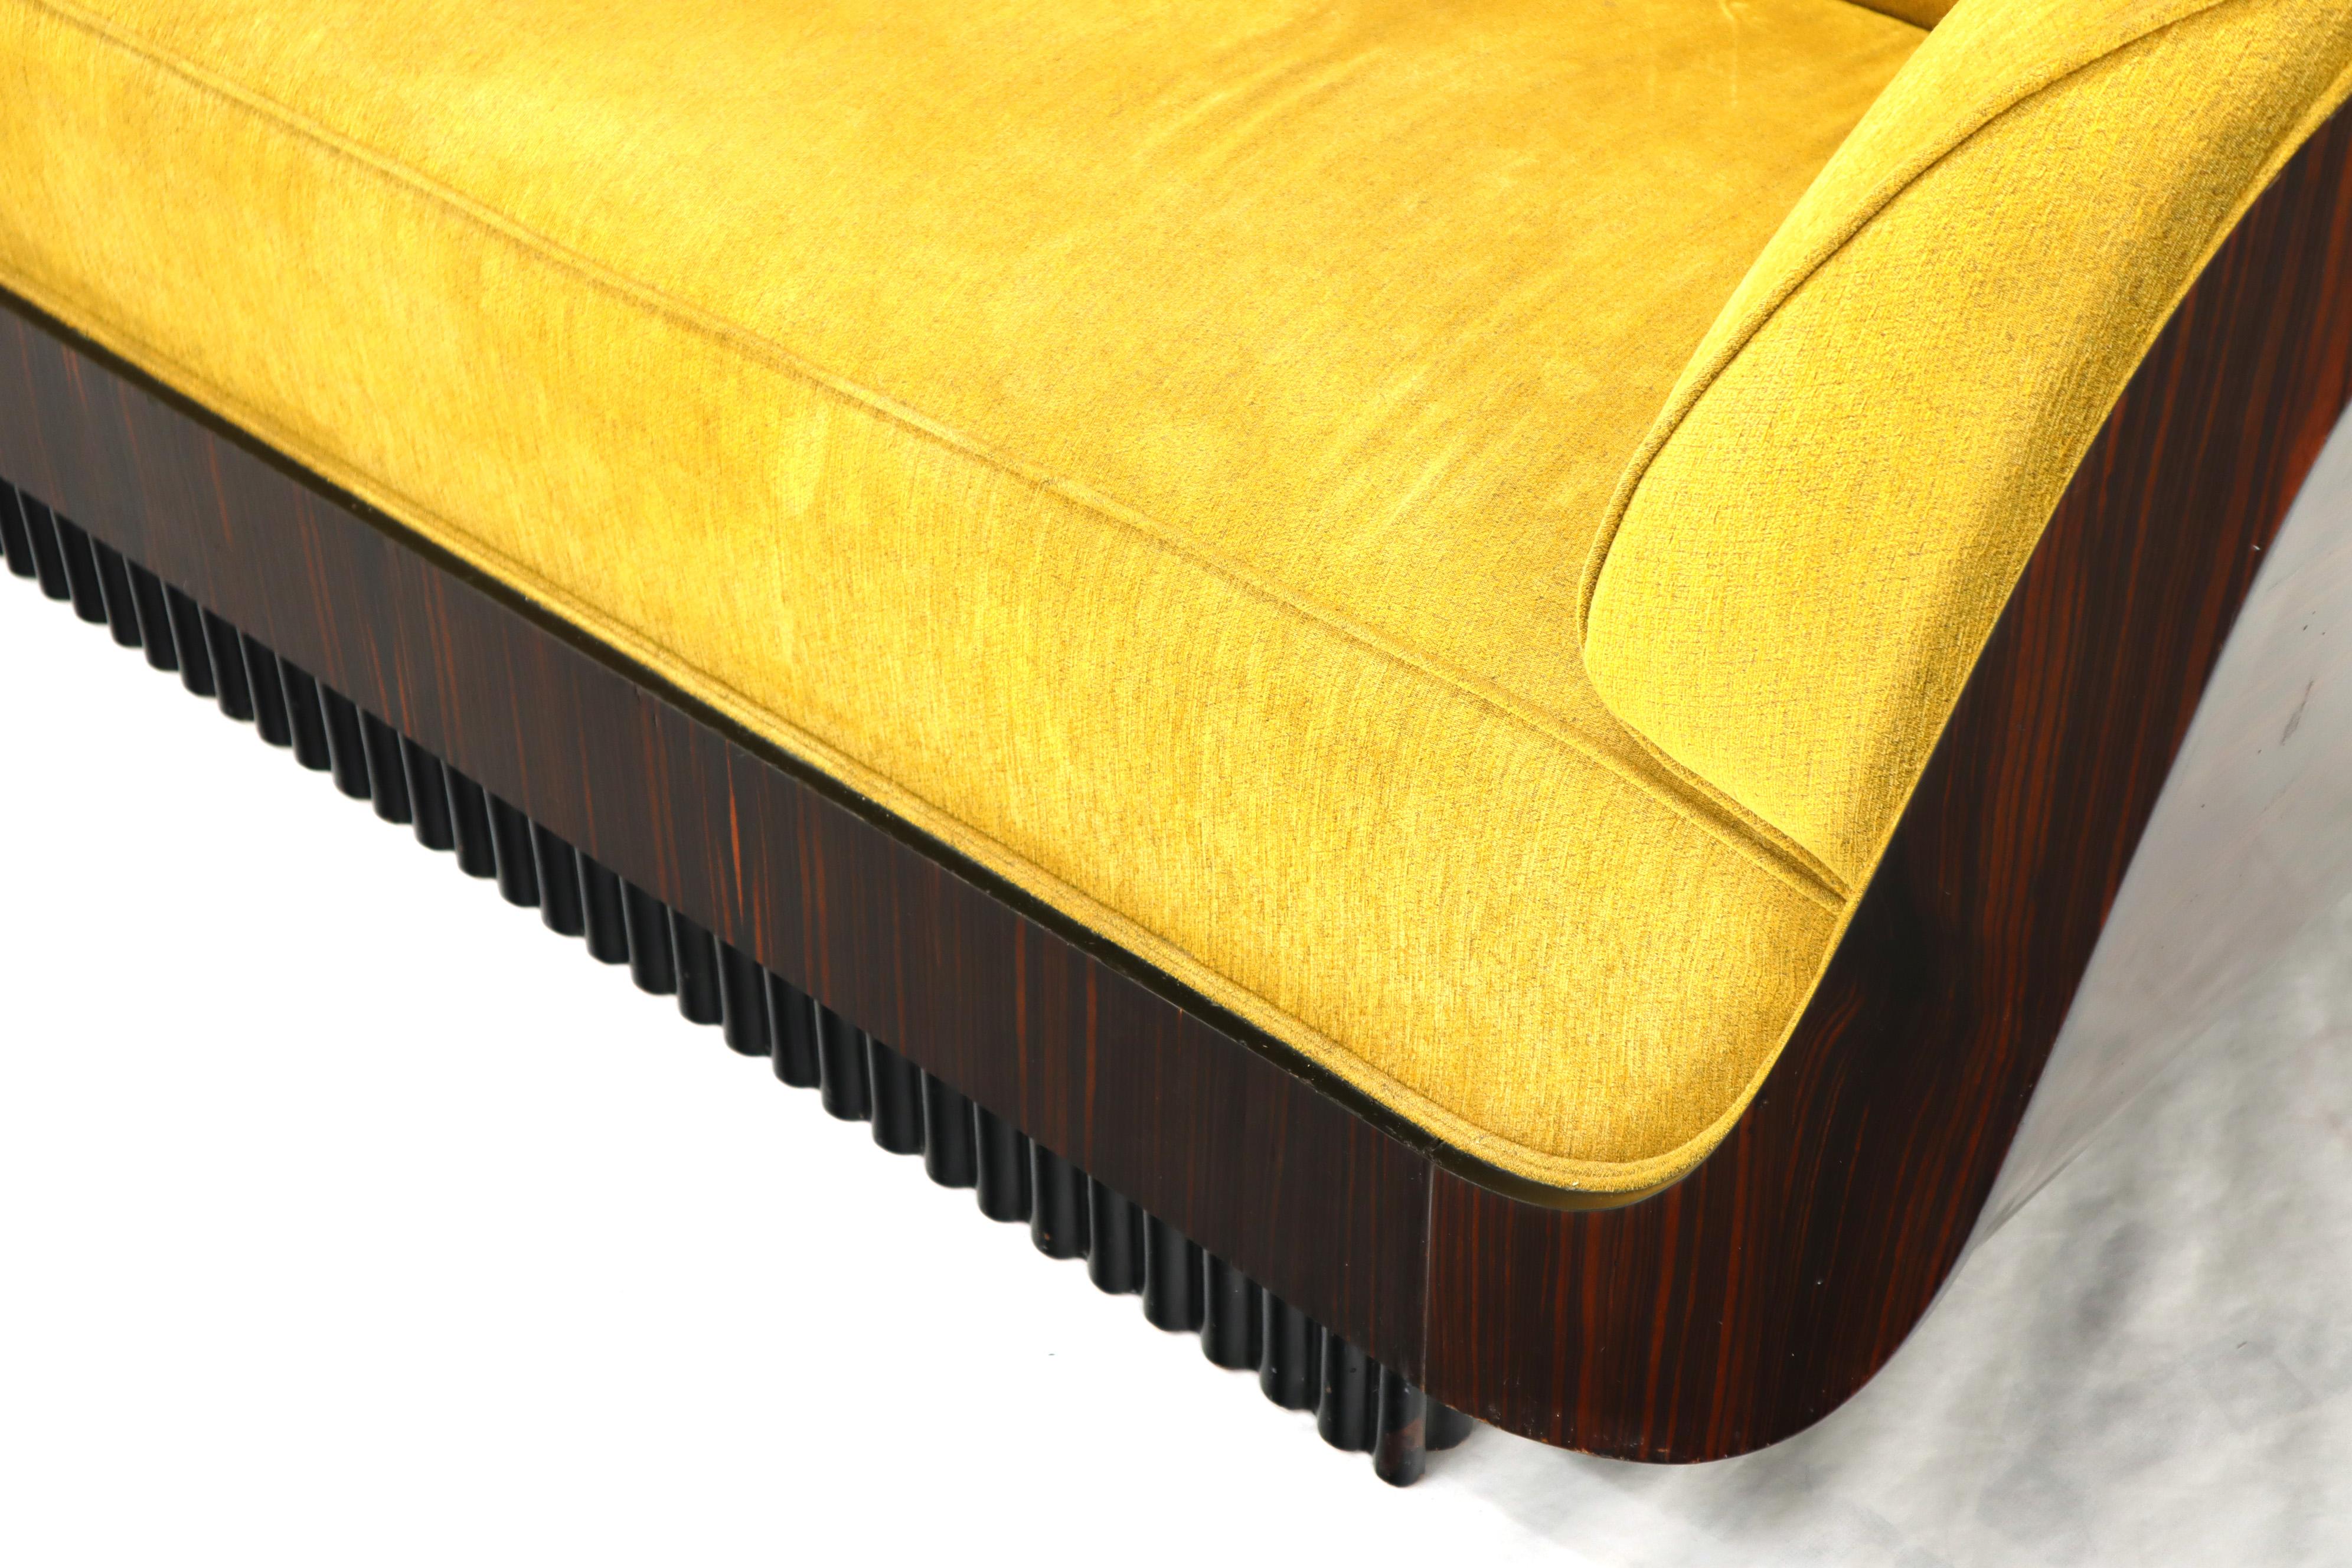 Large French Art Deco Rosewood Sofa in Gold Upholstery Scalloped Edge For Sale 3